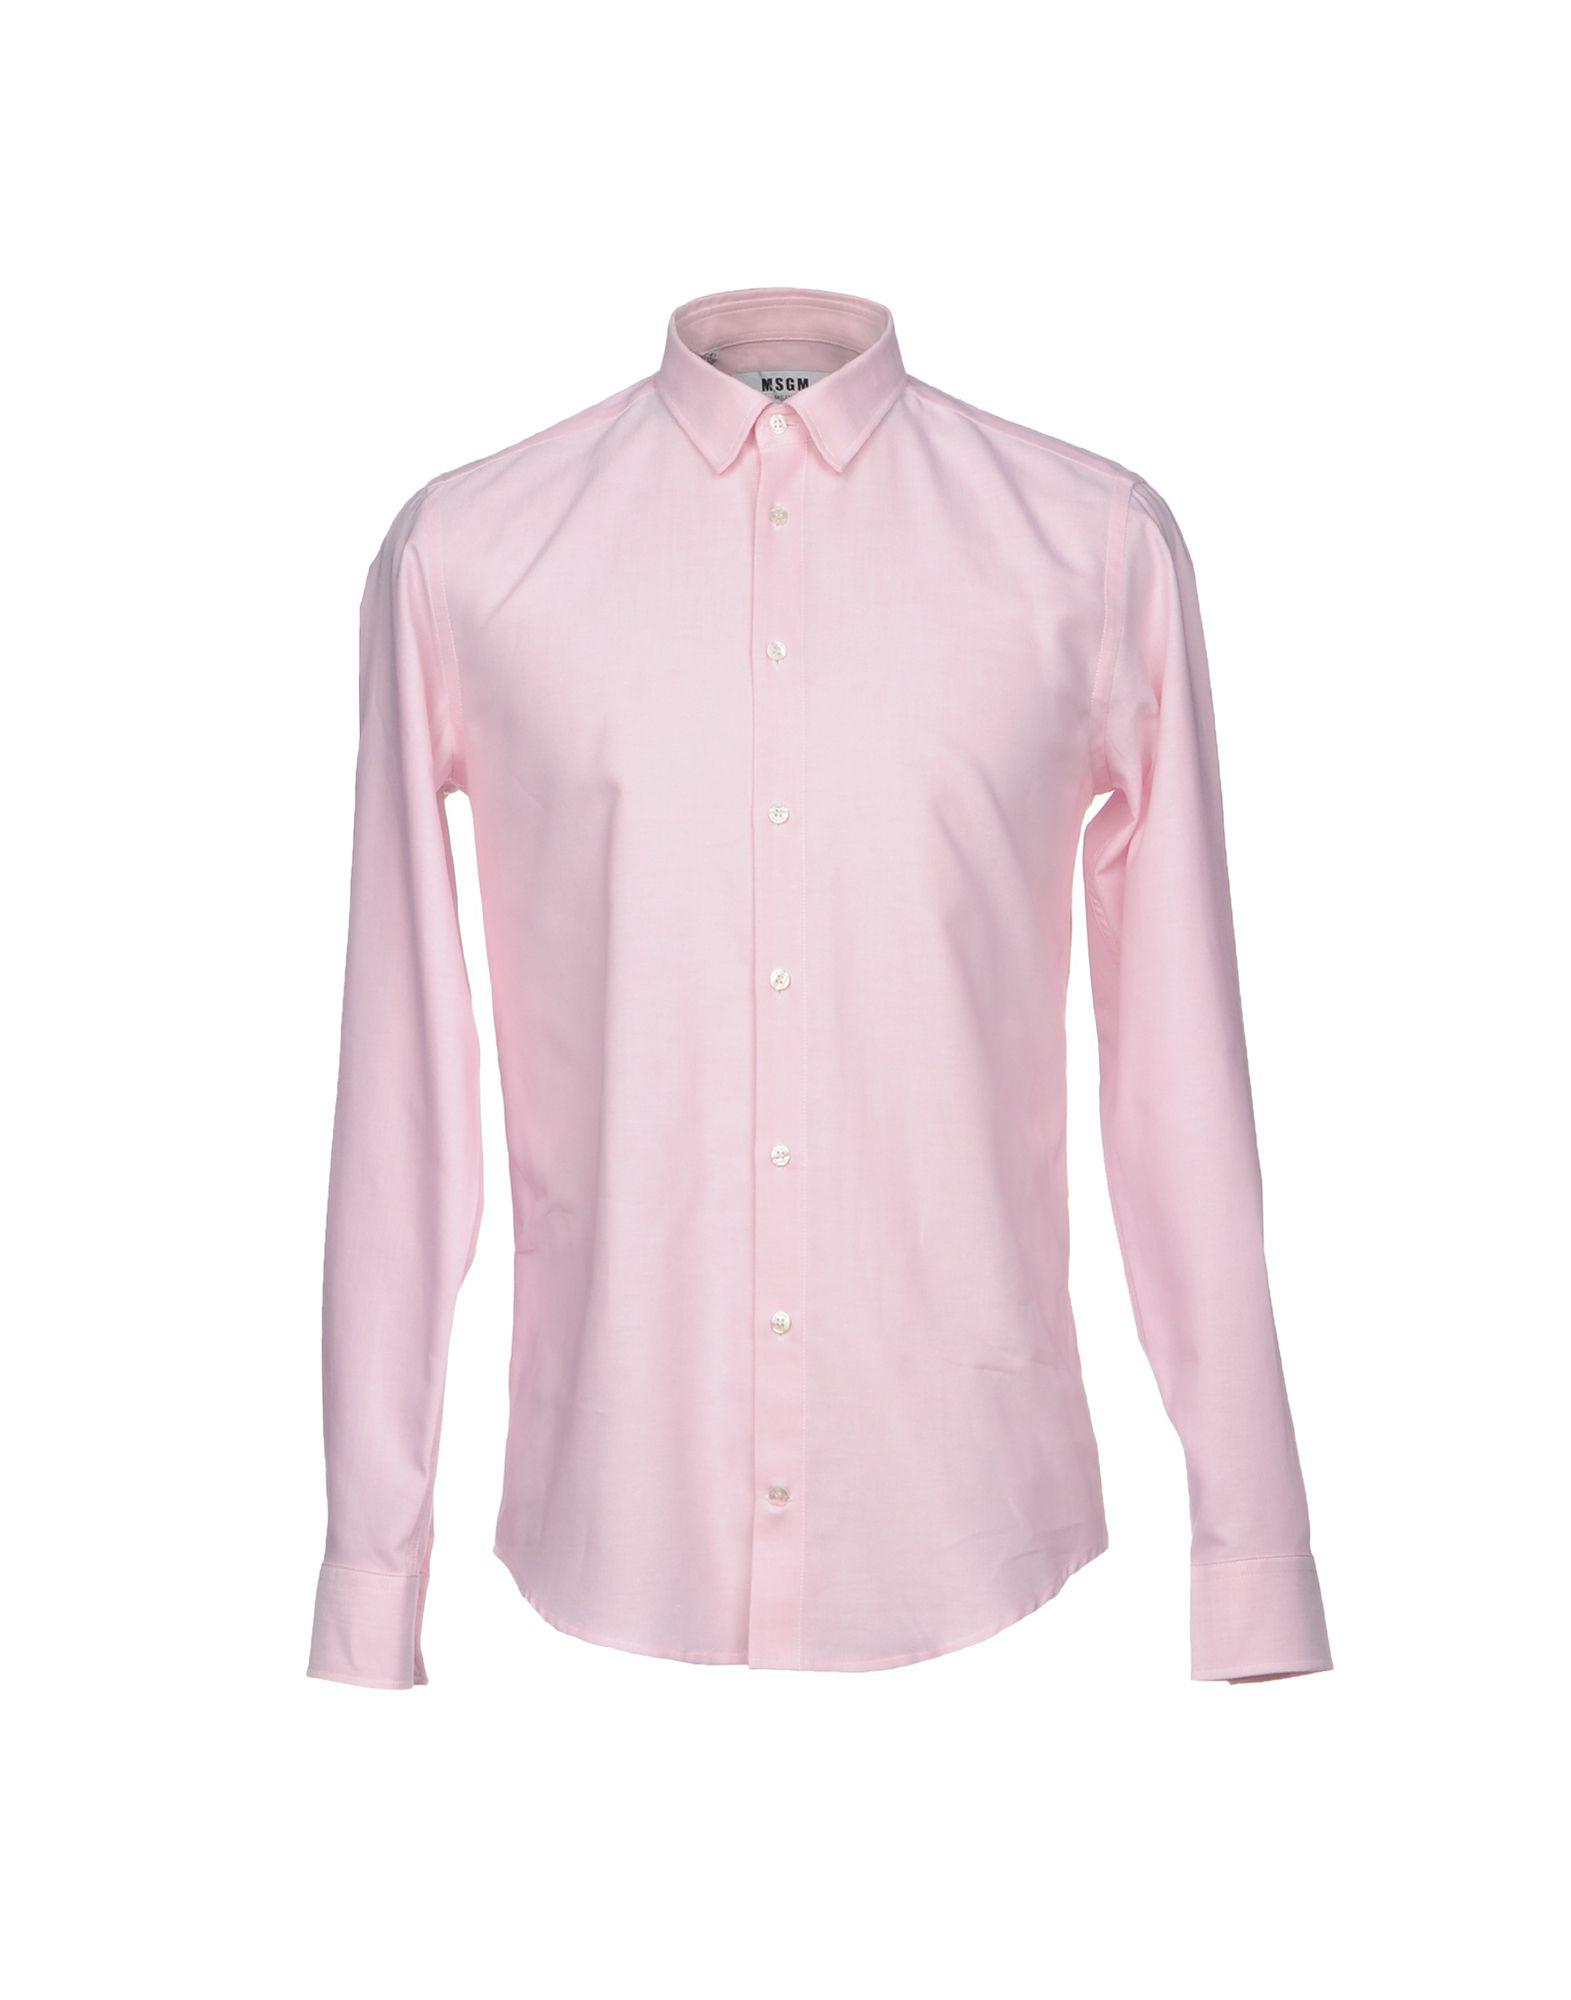 MSGM Cotton Shirt in Pink for Men - Lyst